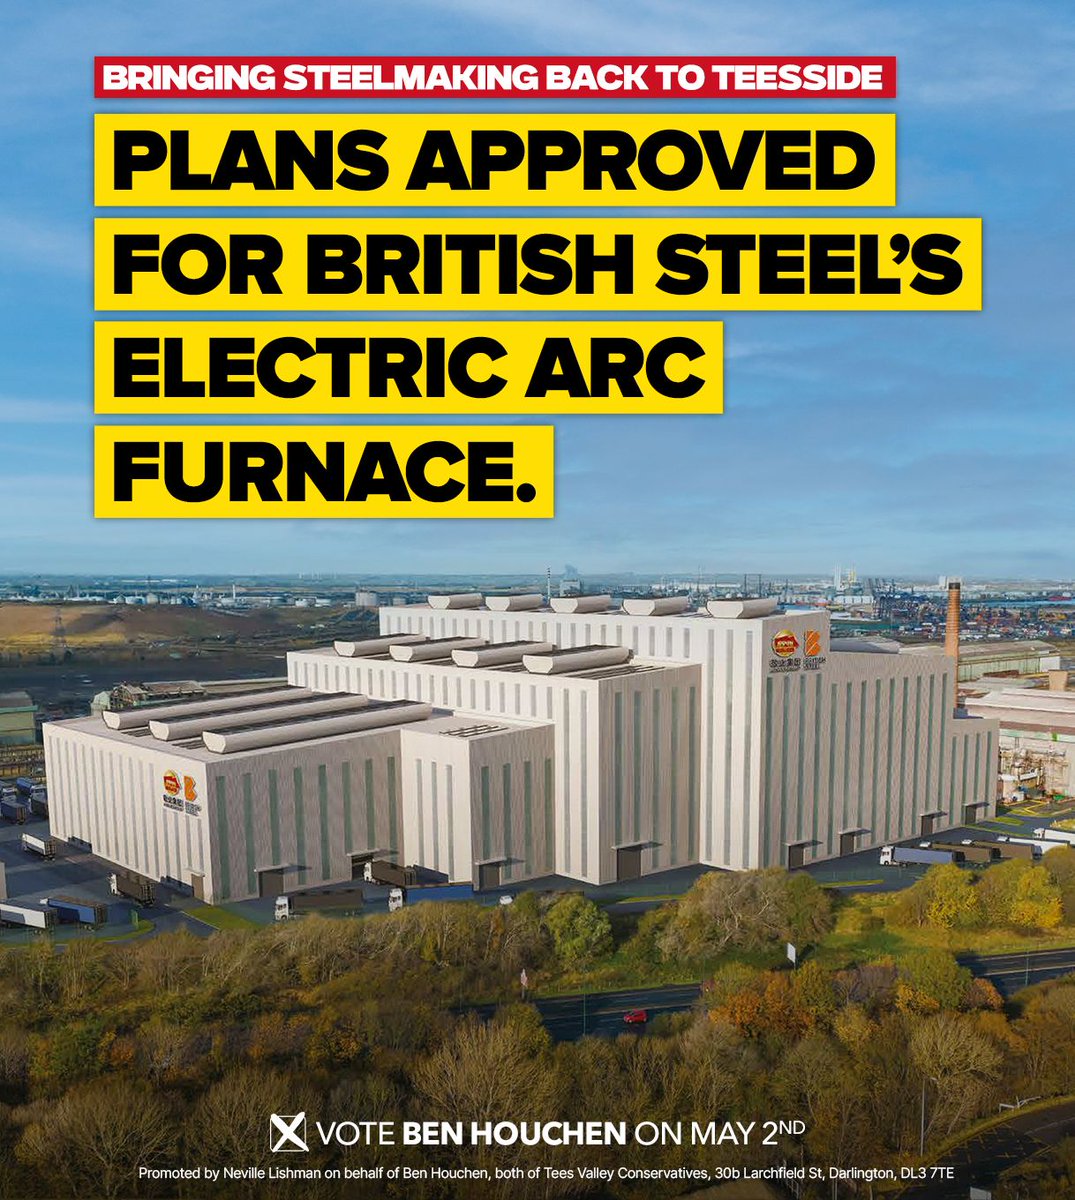 ✅ NEW STEEL PLANT PLANNING APPROVED ✅ This morning it was confirmed that British Steel have had planning for their new Electric Arc Furnace approved! 🇬🇧 I have fought to deliver hundreds of local steel jobs and now, Teesside Steel is BACK on the map 🌎 Promise DELIVERED✅